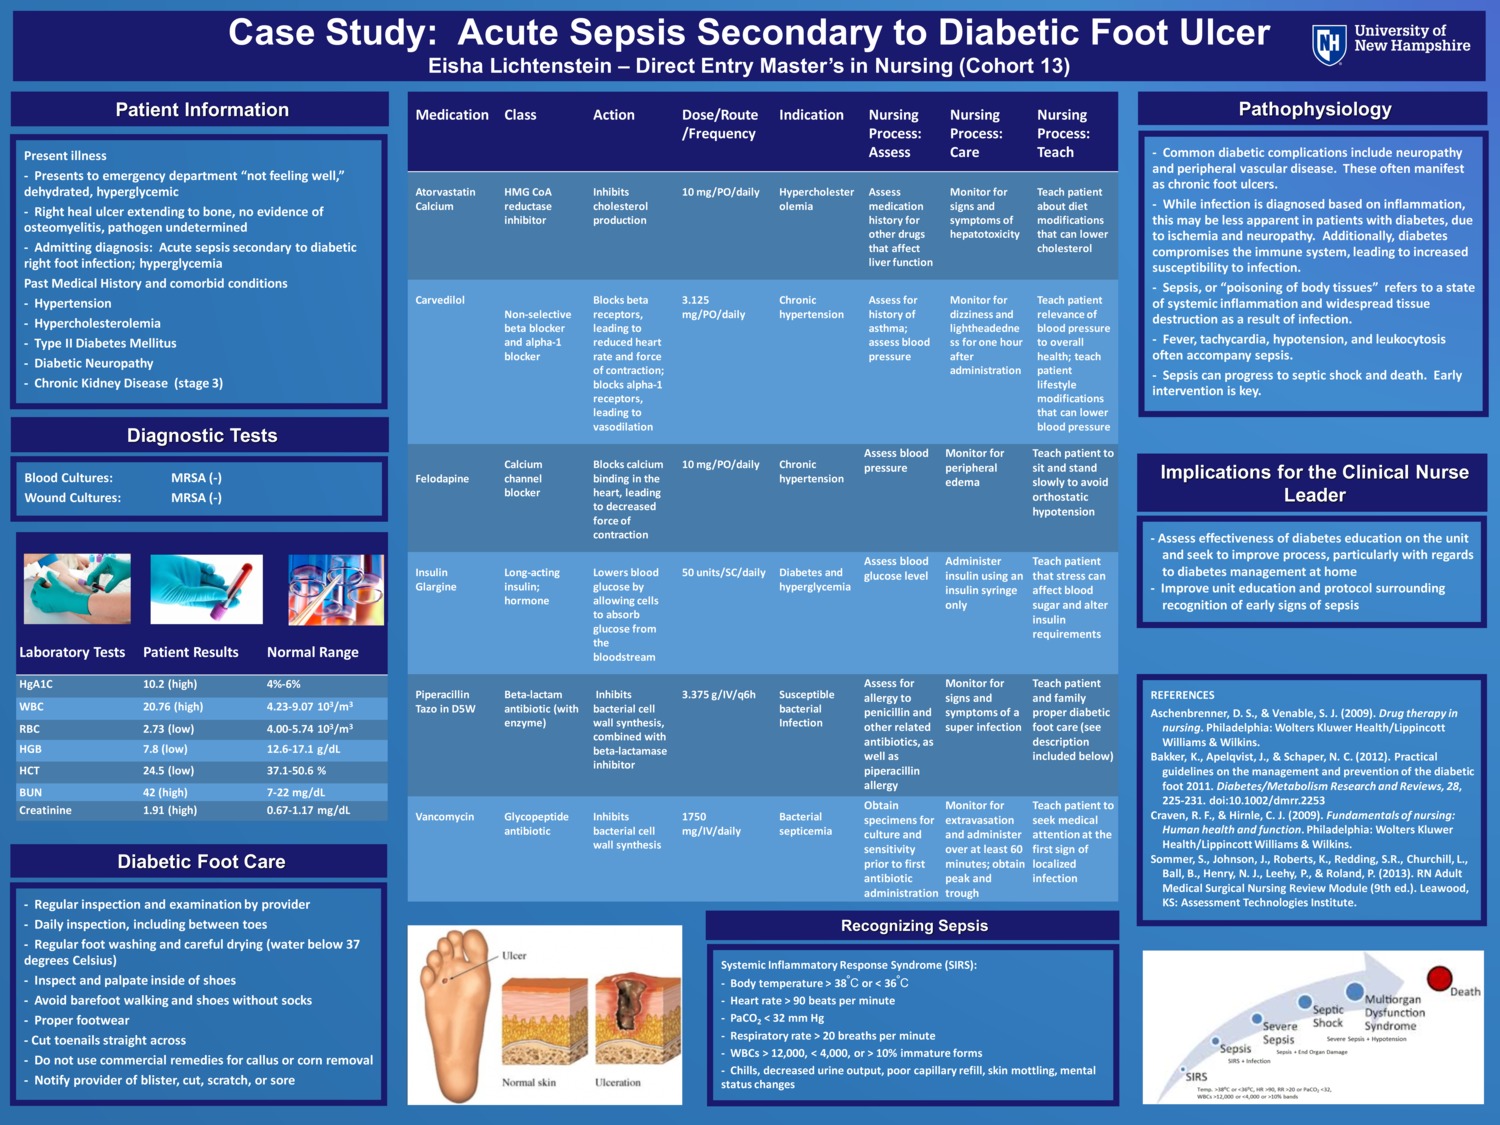 Case Study: Acute Sepsis Secondary To Diabetic Foot Ulcer by ELichtenstein